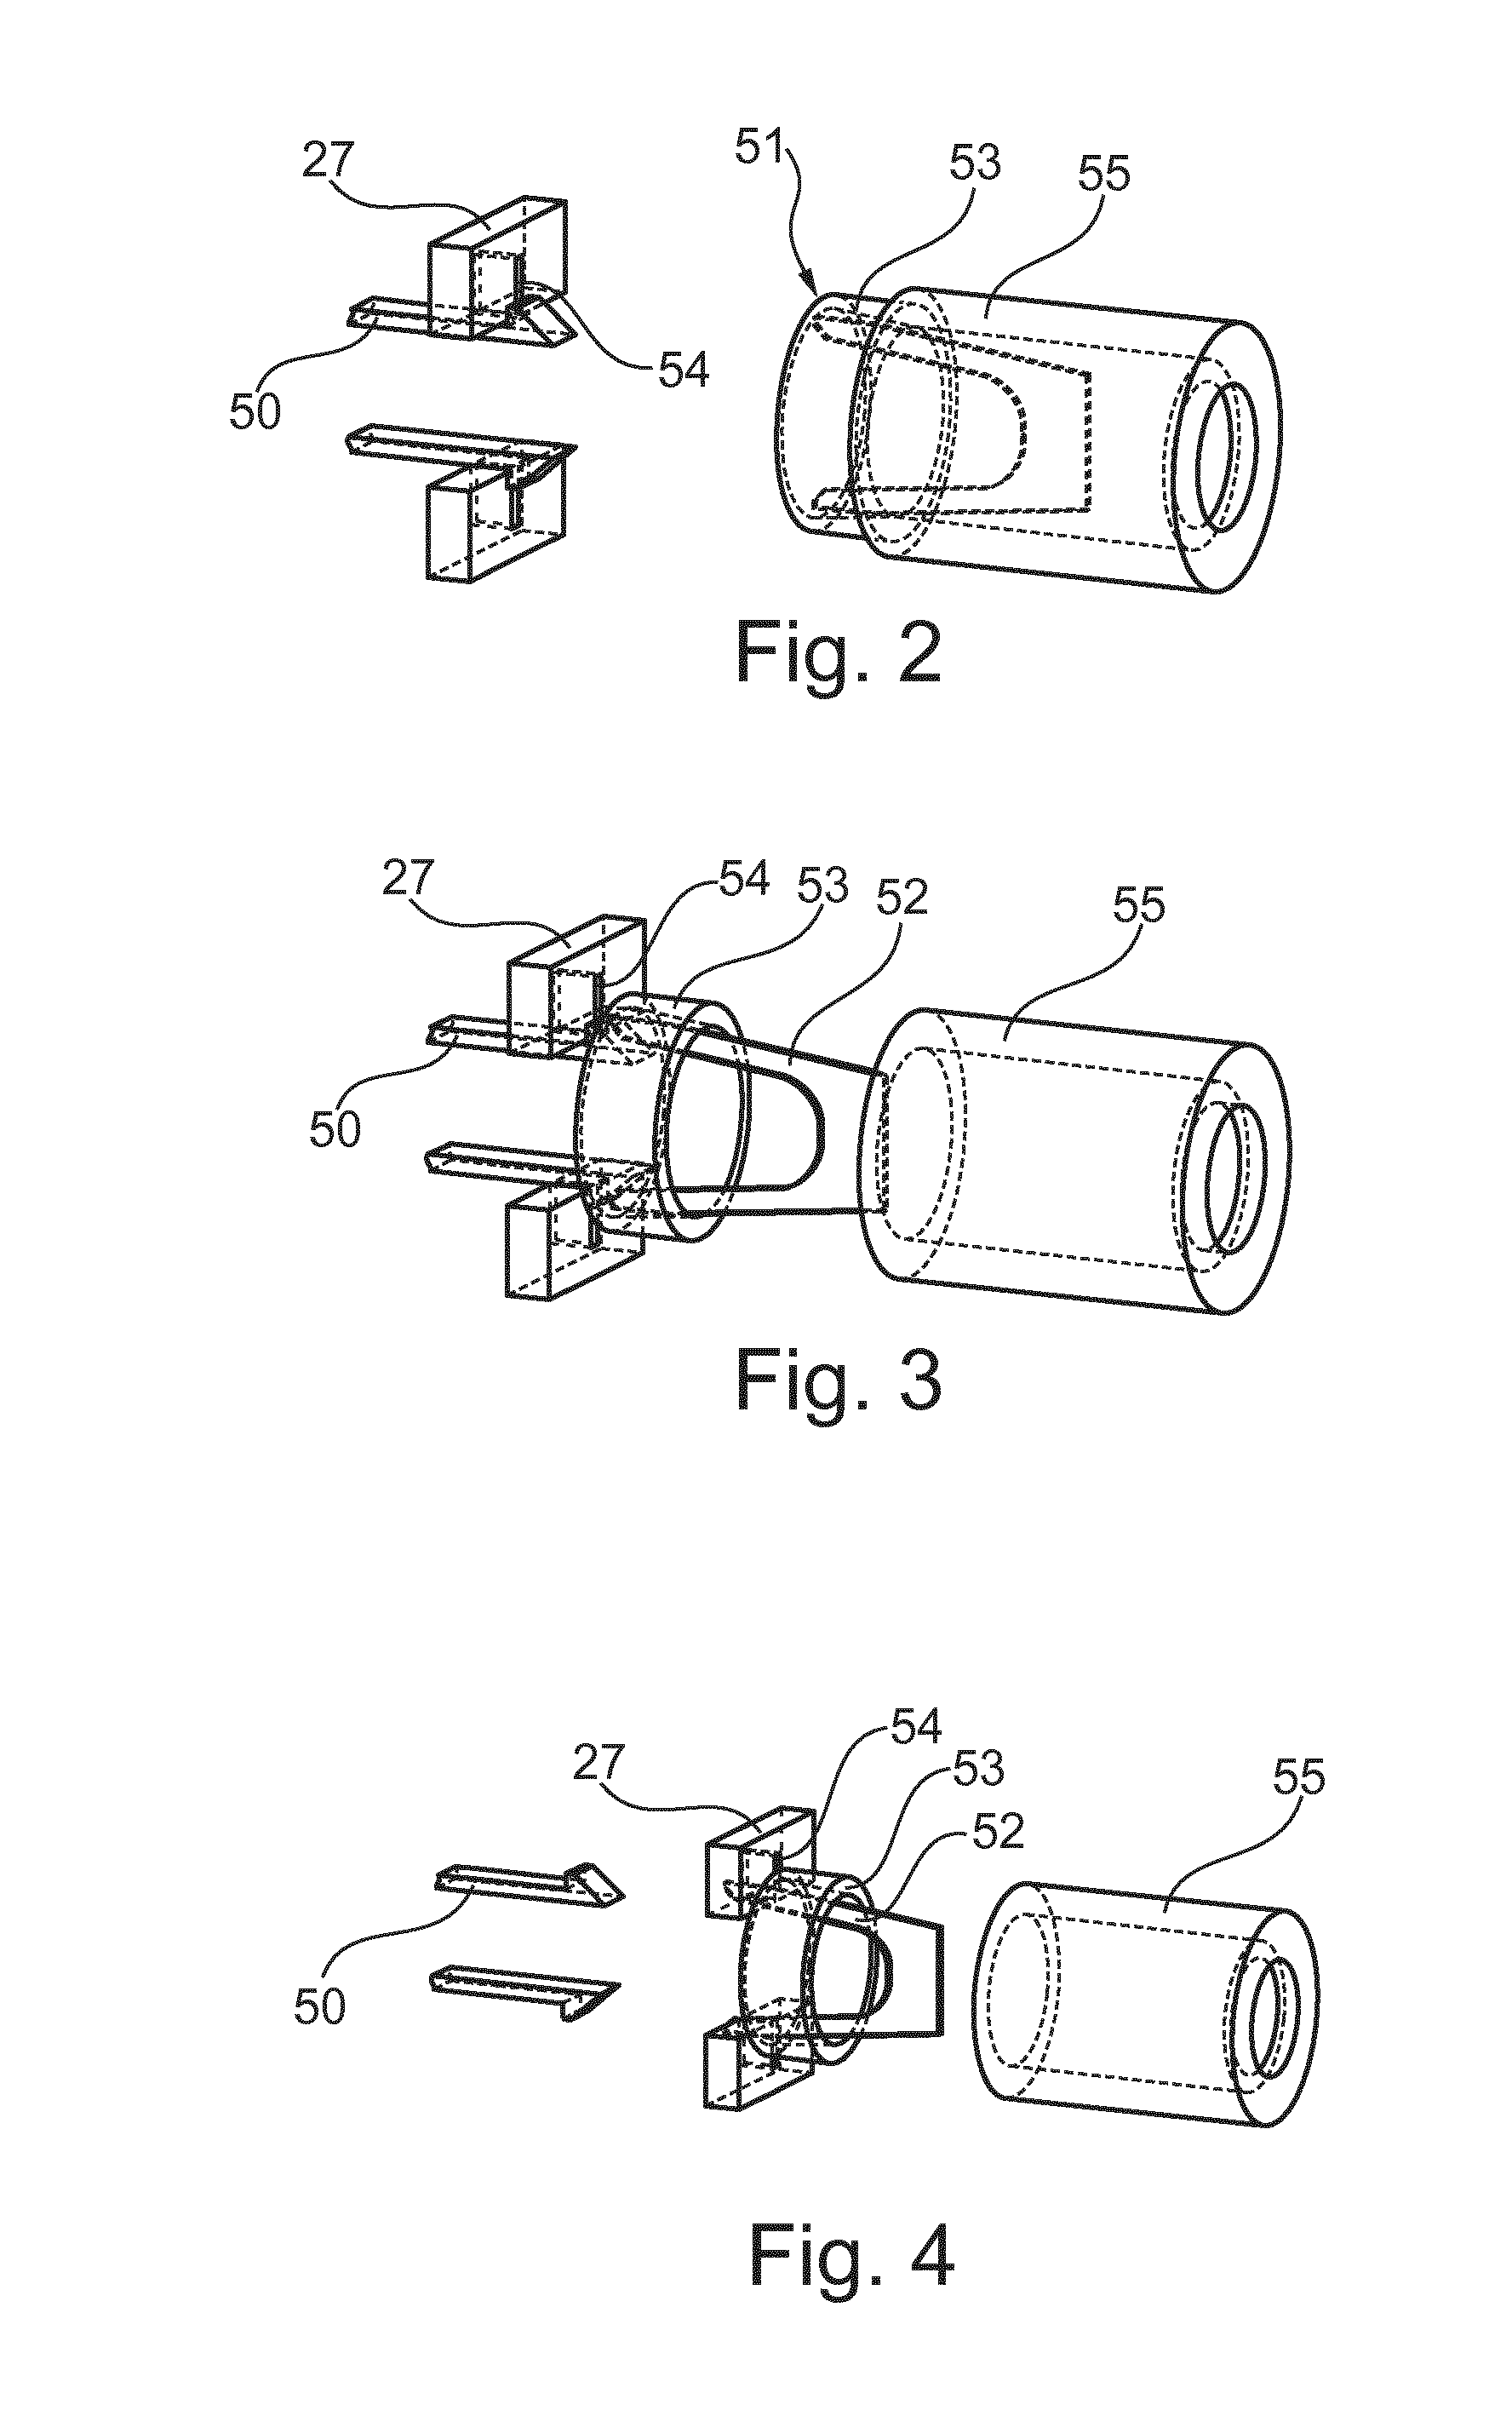 Device for Taking at Least One Sample of Tissue